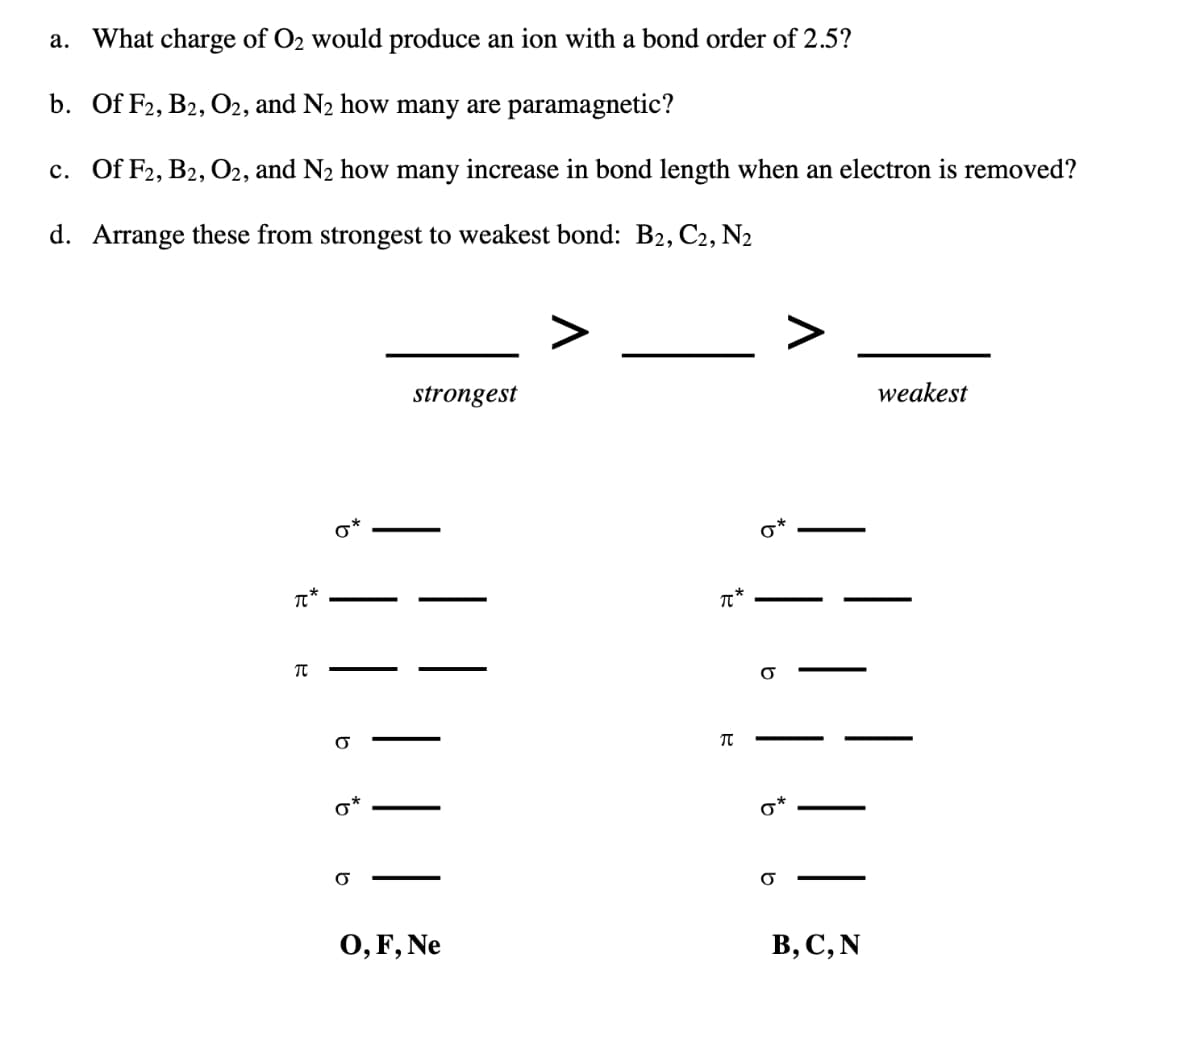 a. What charge of O2 would produce an ion with a bond order of 2.5?
b. Of F2, B2, O2, and N2 how many are paramagnetic?
c. Of F2, B2, O2, and N2 how many increase in bond length when an electron is removed?
d. Arrange these from strongest to weakest bond: B2, C2, N2
π*
Π
b
9
σ
strongest
O, F, Ne
བུ
π*
π
b
σ*
σ
weakest
B, C, N